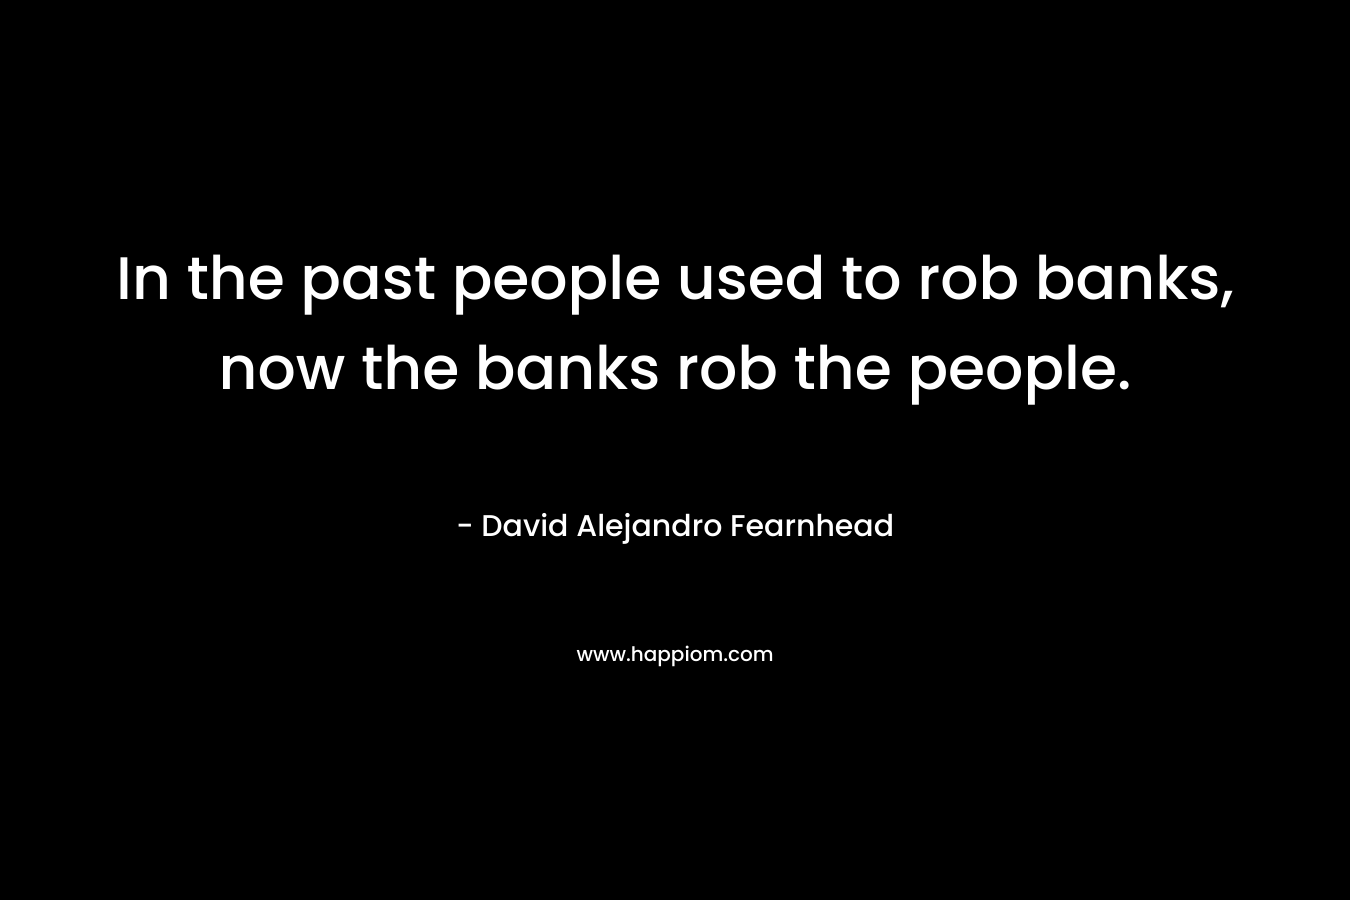 In the past people used to rob banks, now the banks rob the people.